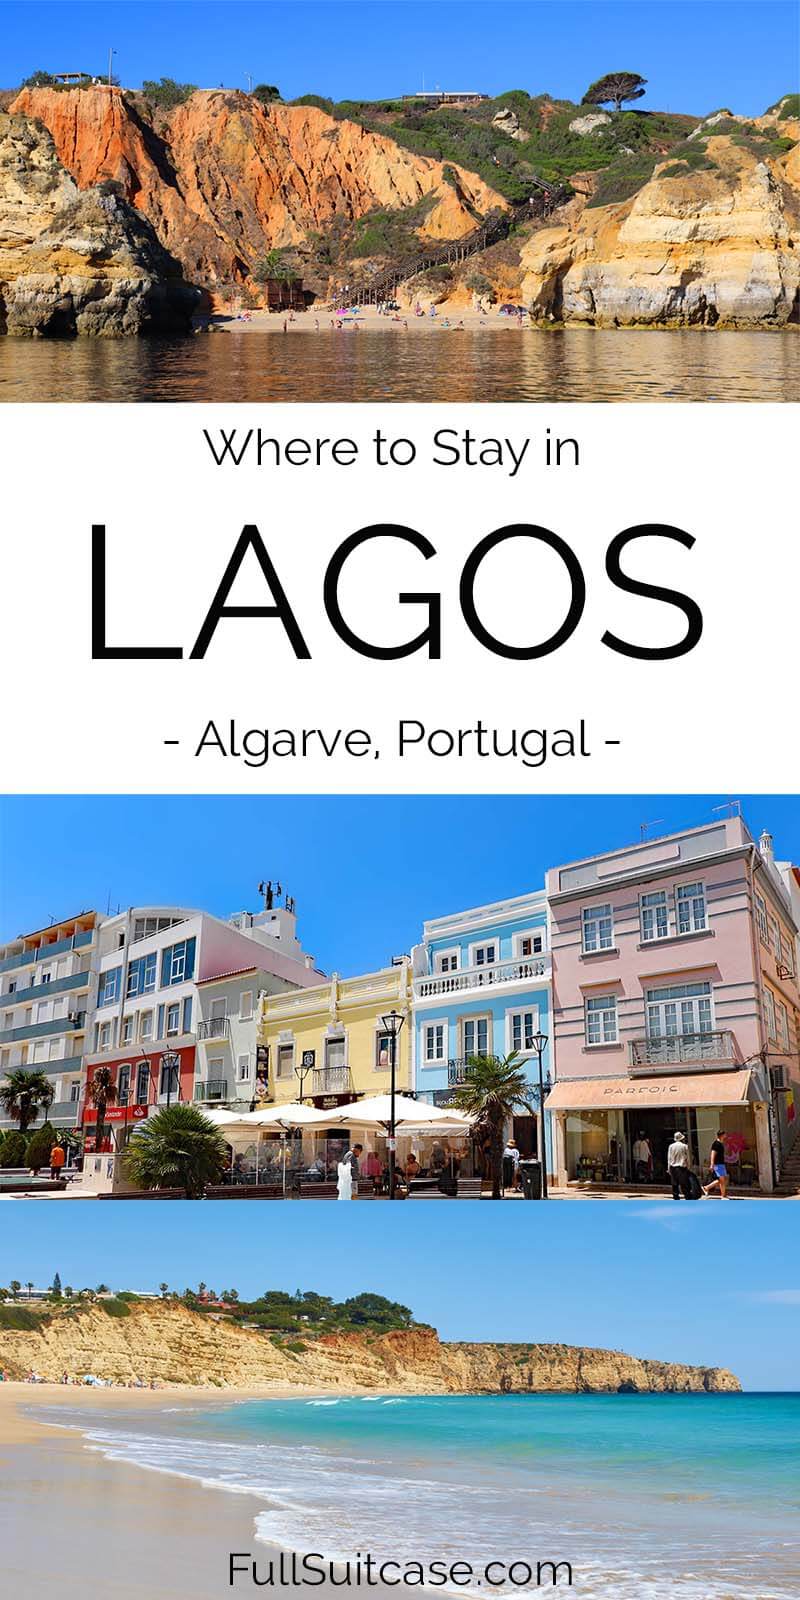 Accommodation guide to Lagos Portugal - best places to stay in Lagos